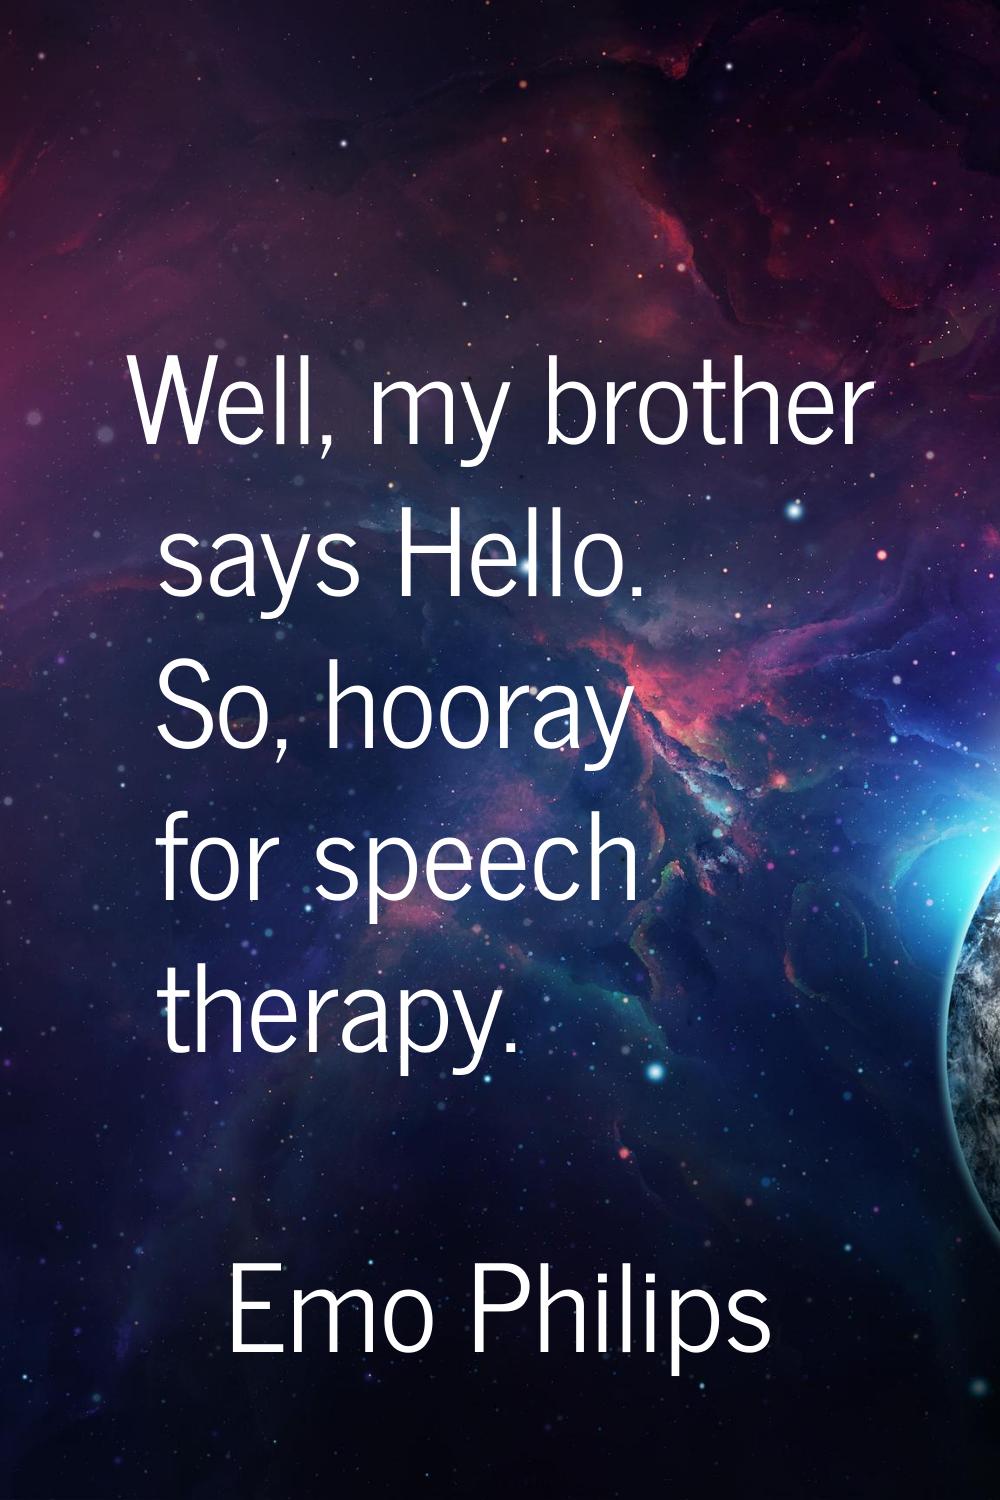 Well, my brother says Hello. So, hooray for speech therapy.